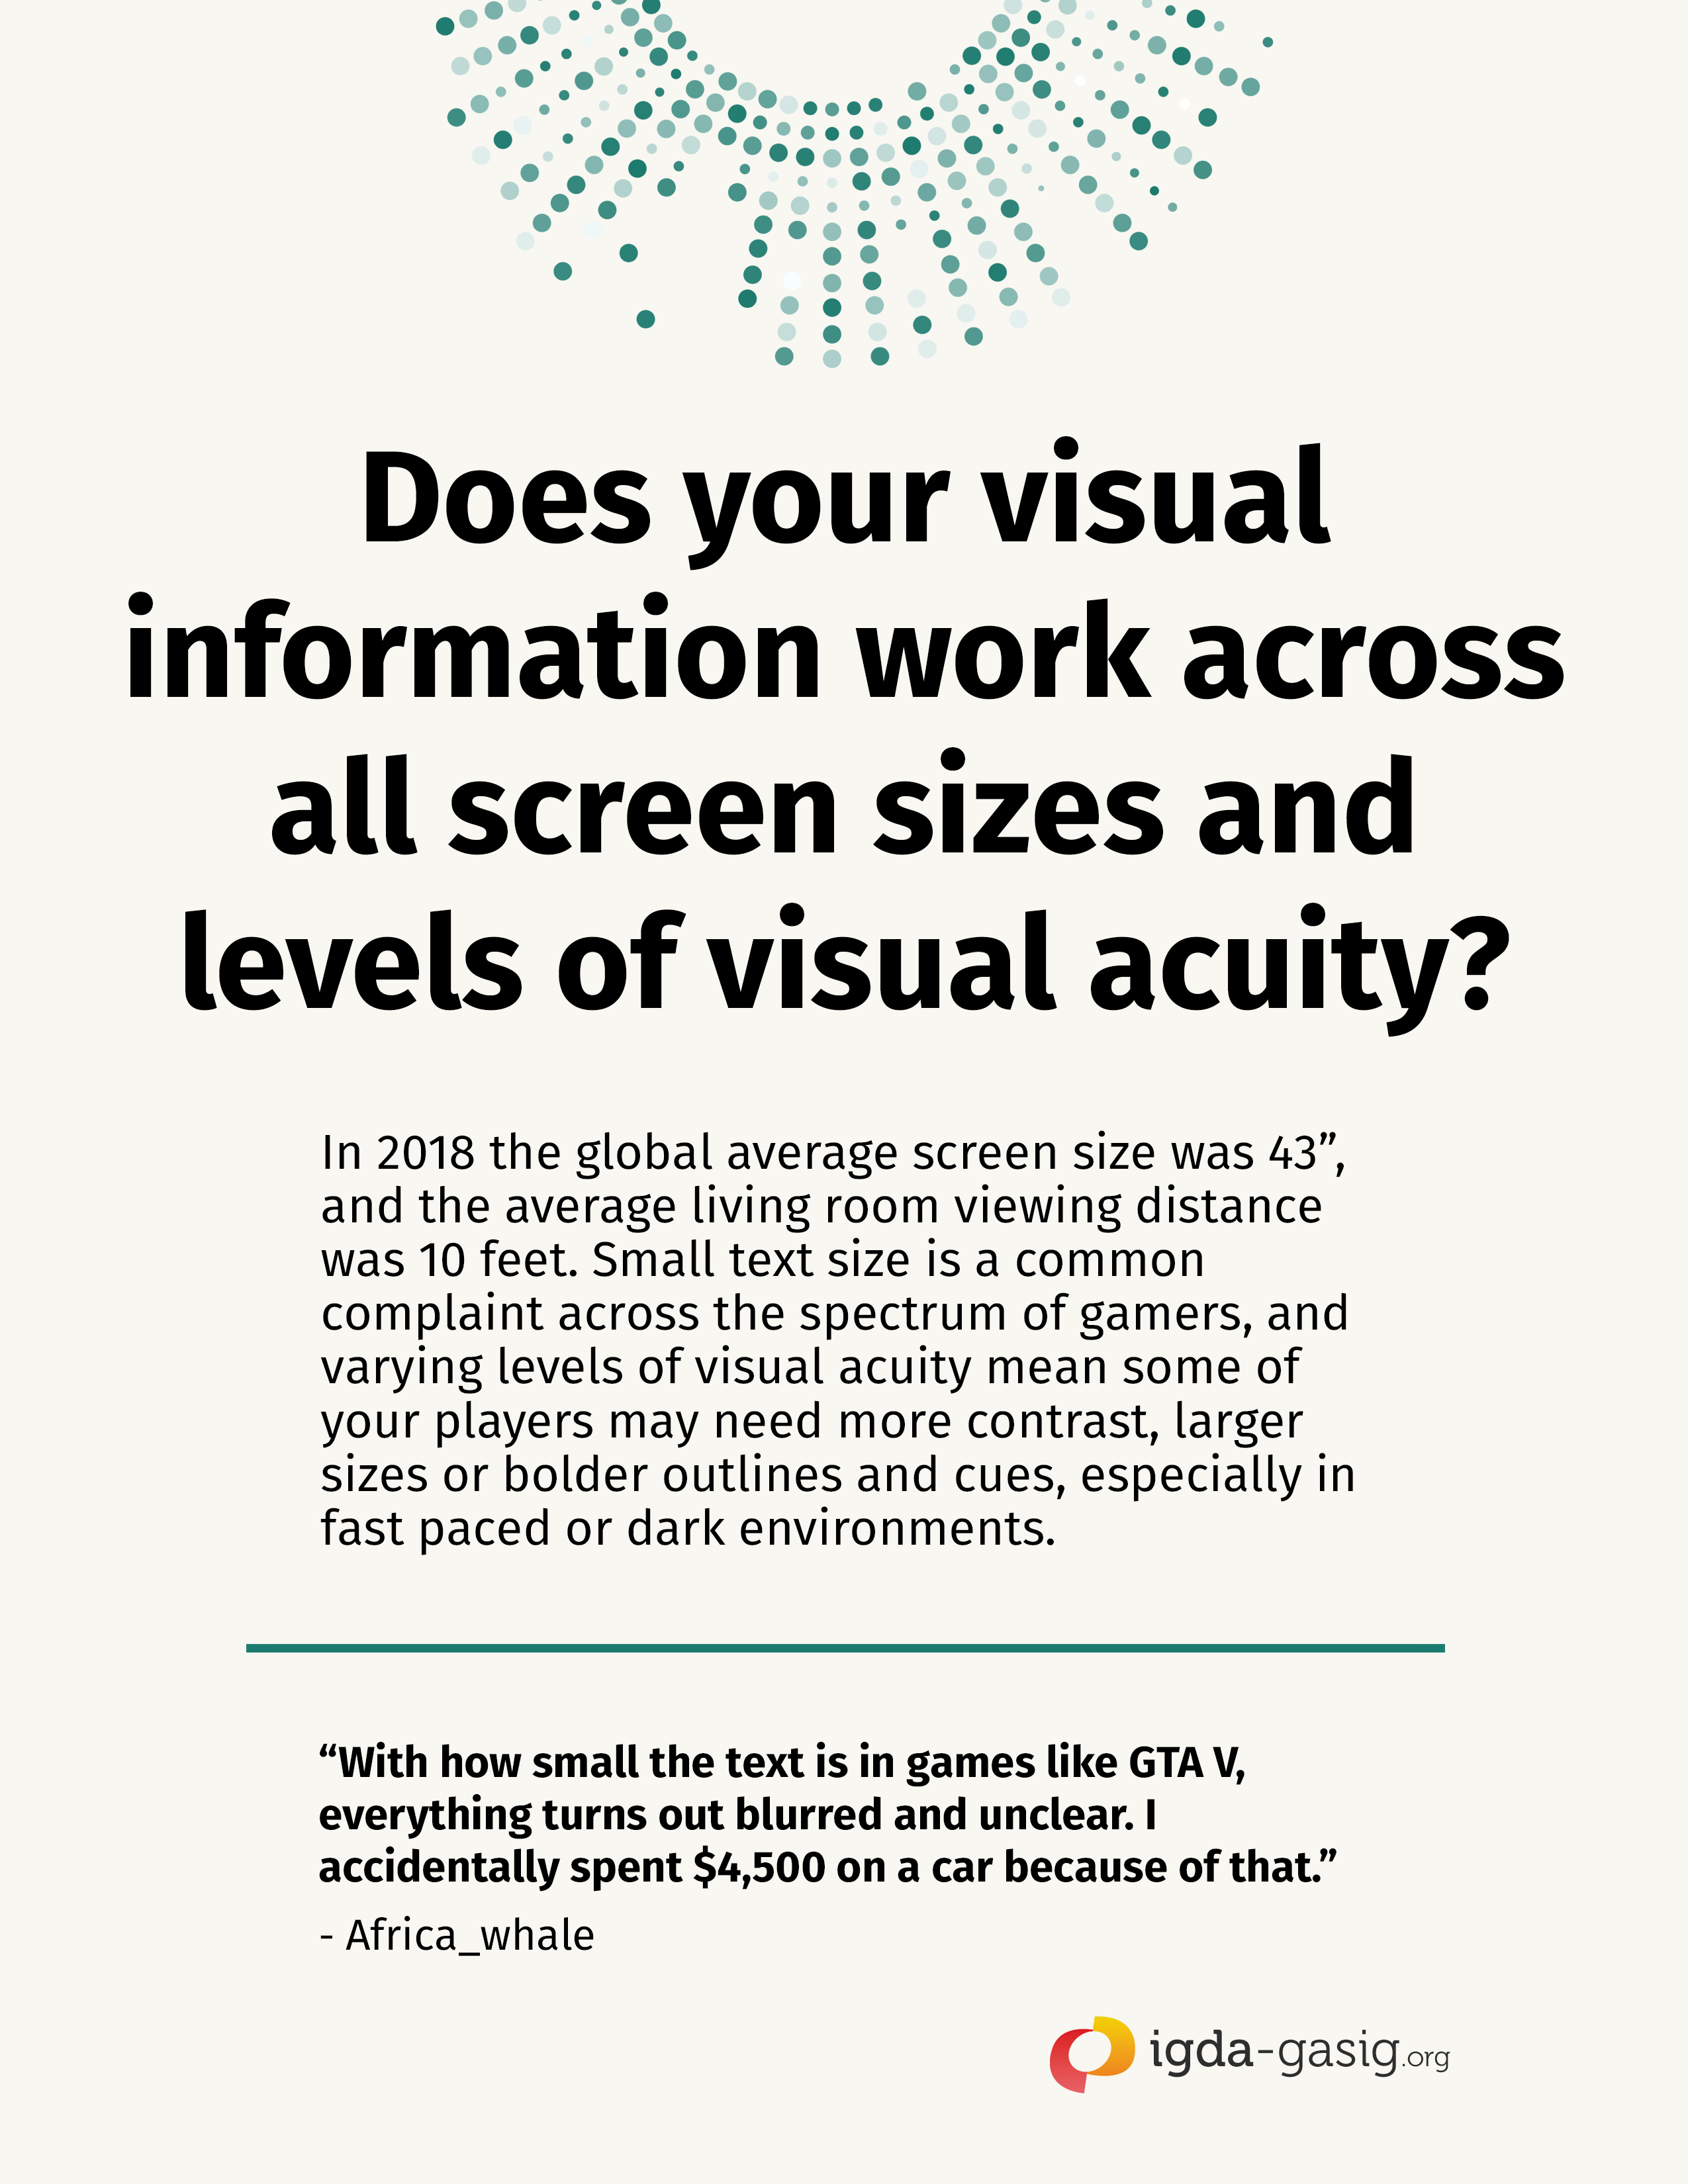 Does your visual information work across all screen sizes and levels of visual acuity? (see end of page for full text)